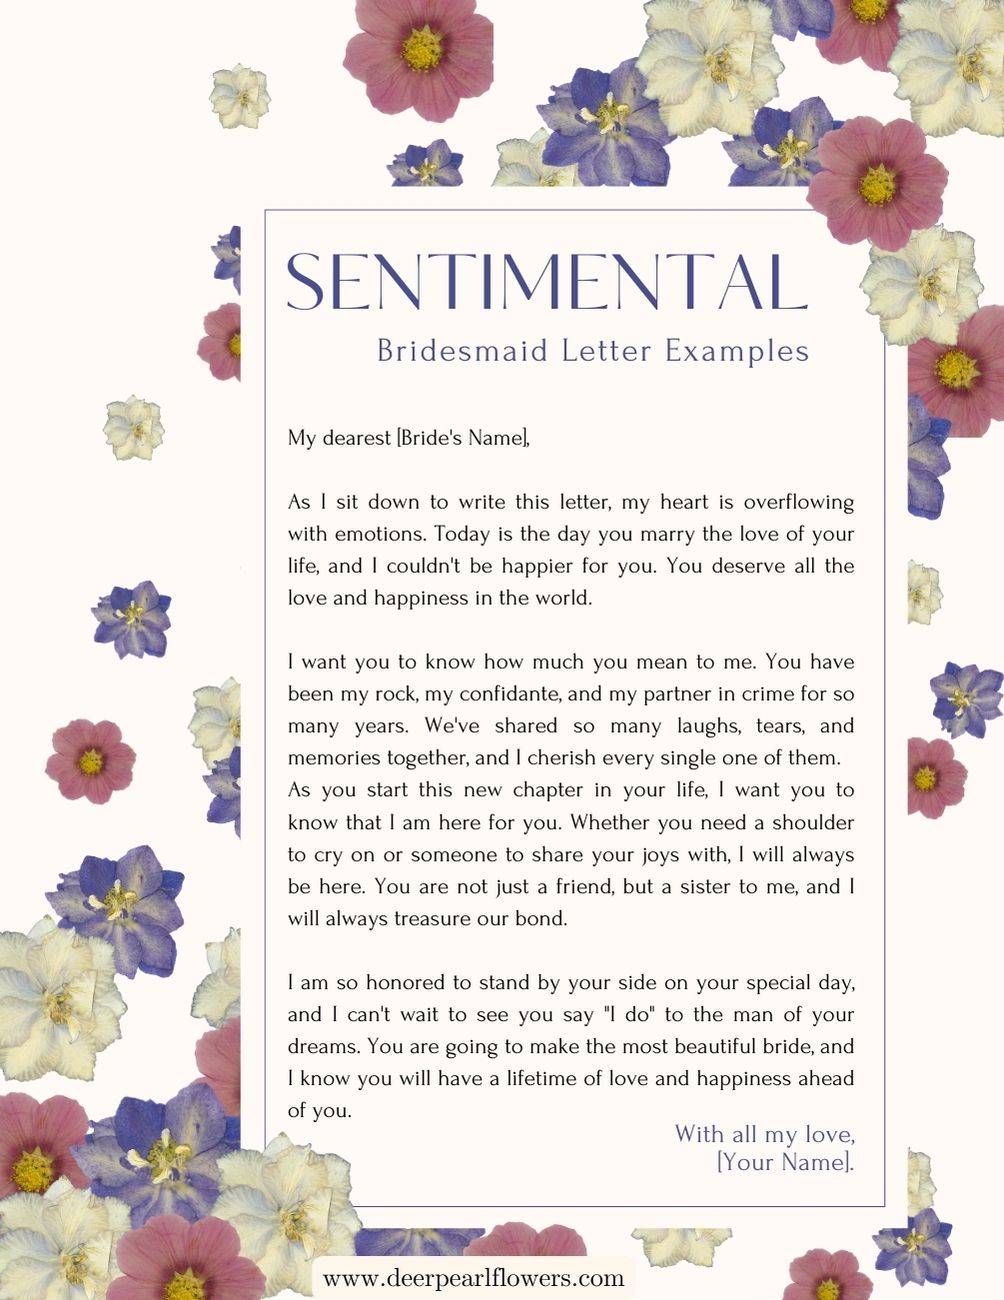 Sentimental Bridesmaid Letter to Bride Examples